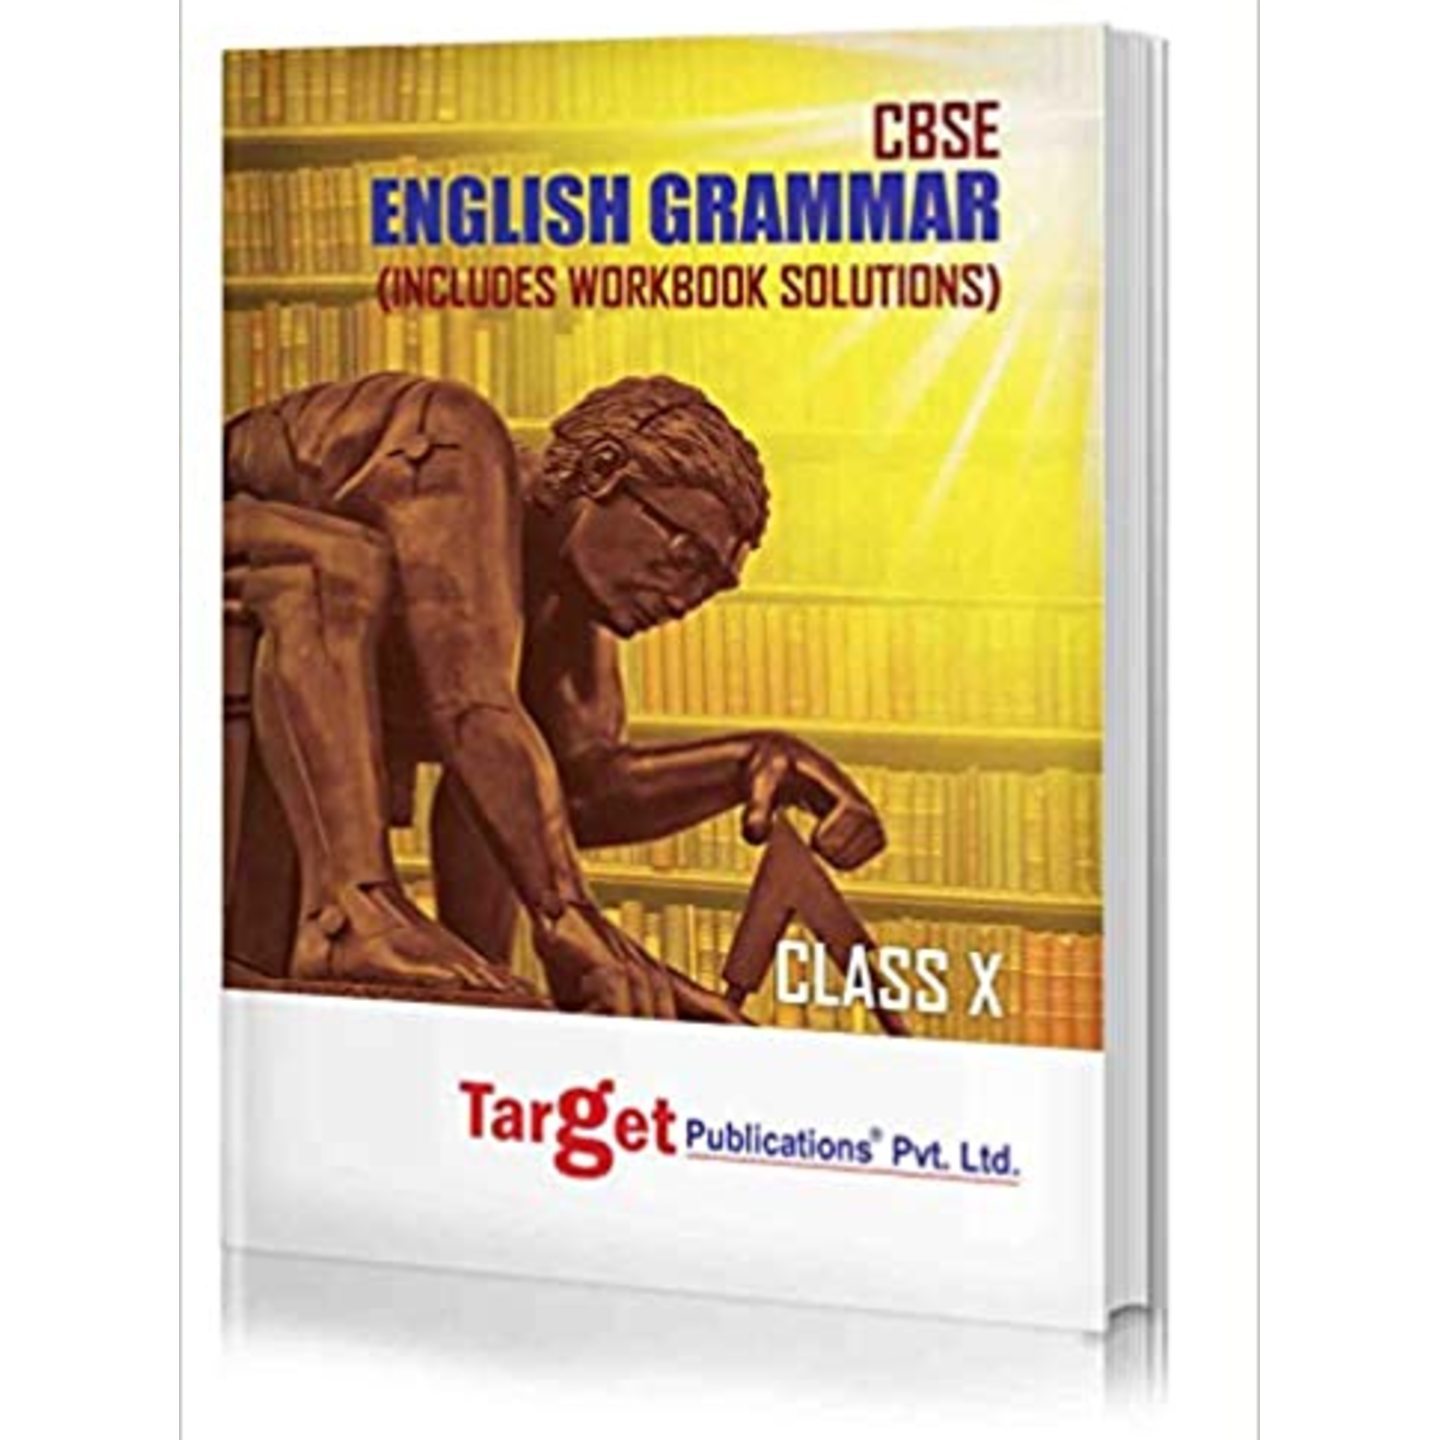 TARGET CBSE Class 10 English Grammar Notes Book  Solved and Practice Exercises based on NCERT Syllabus  Topicwise X CBSE Board Exam Questions with Solutions  Includes Class 10th Workbook Solutions